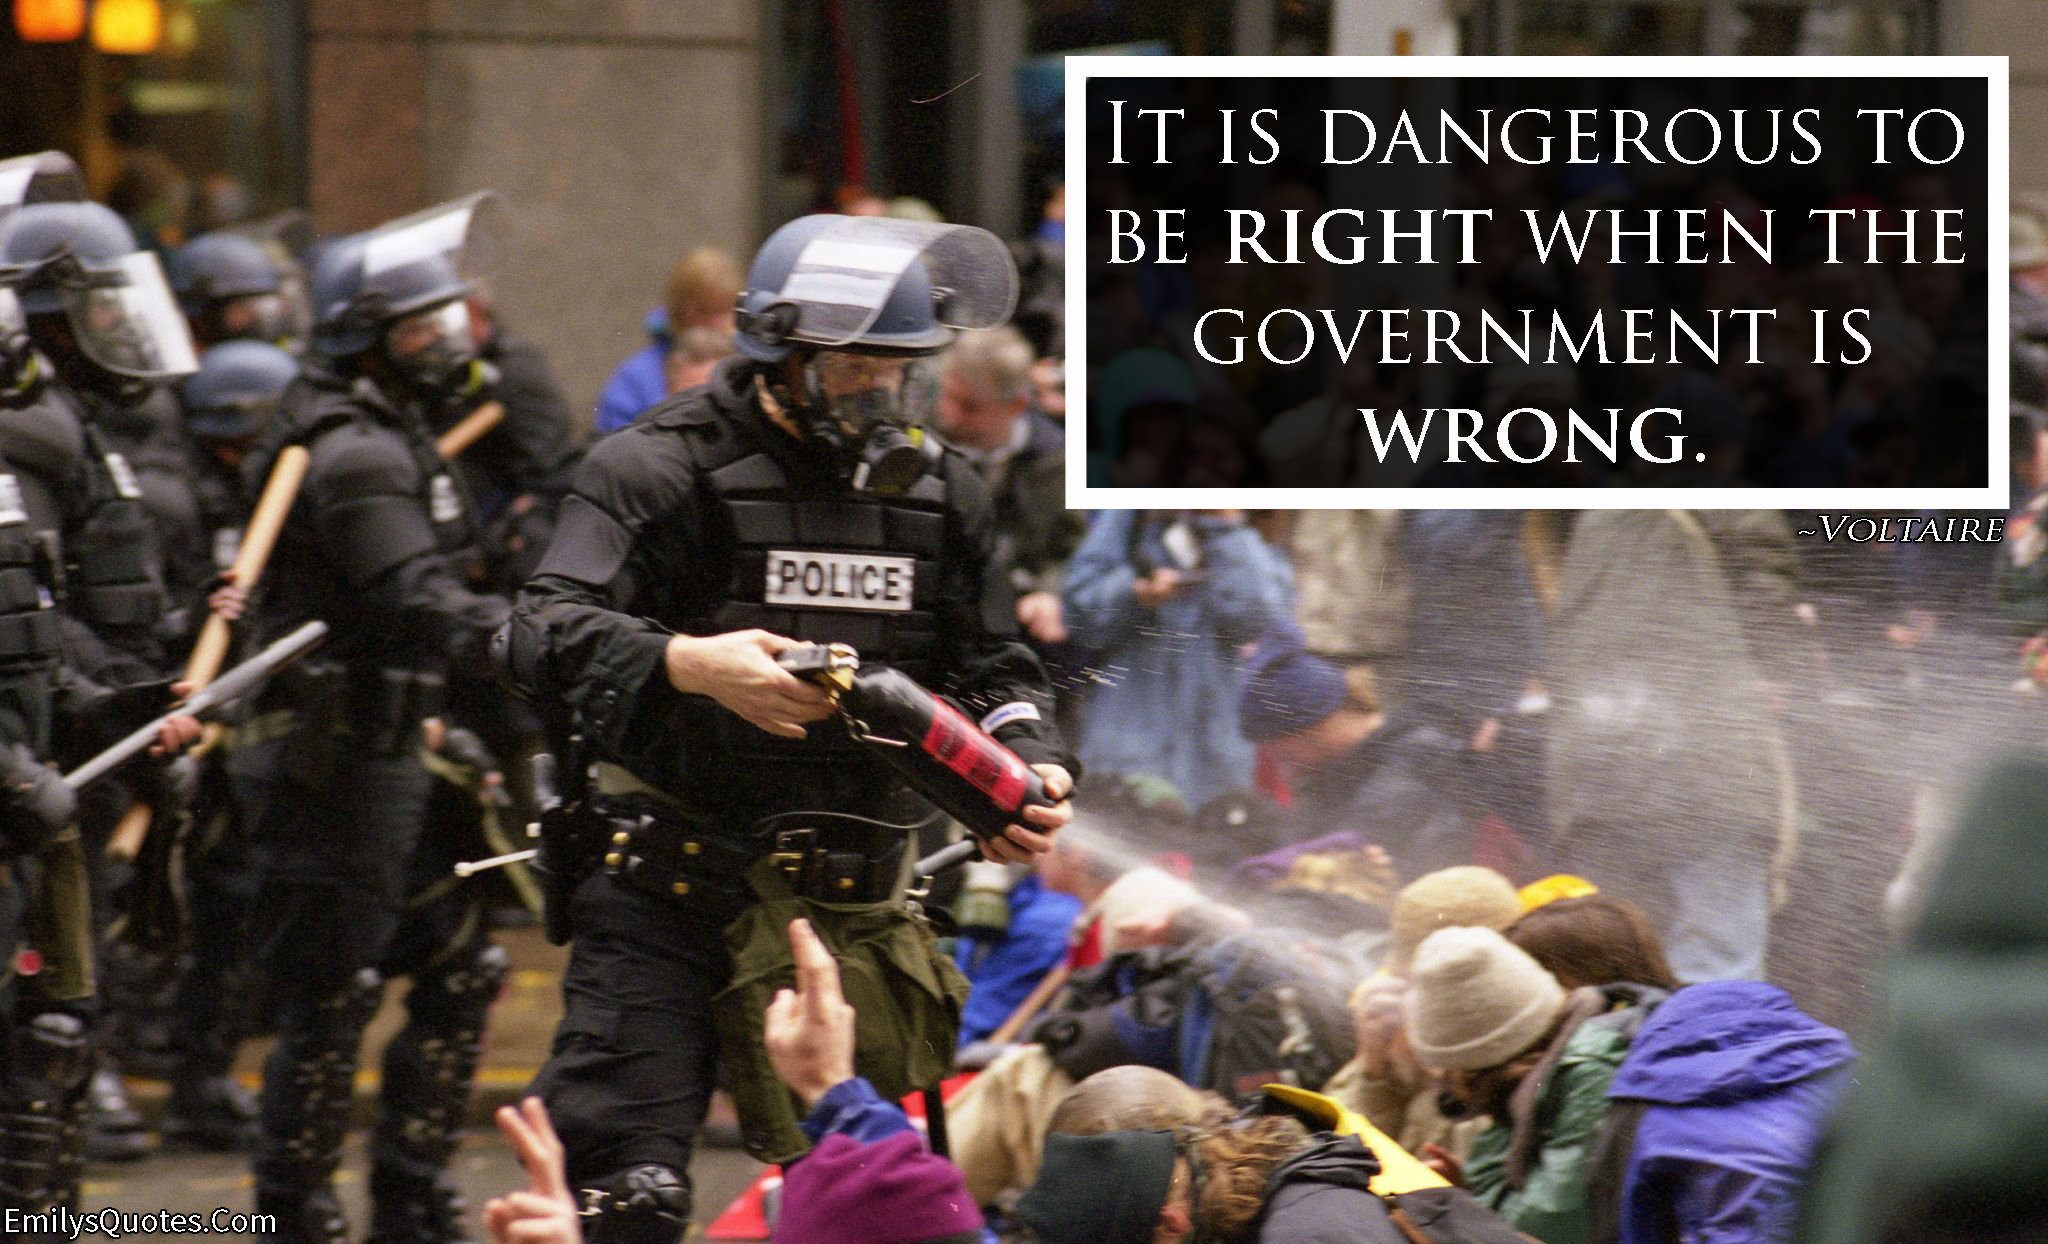 It is dangerous to be right when the government is wrong